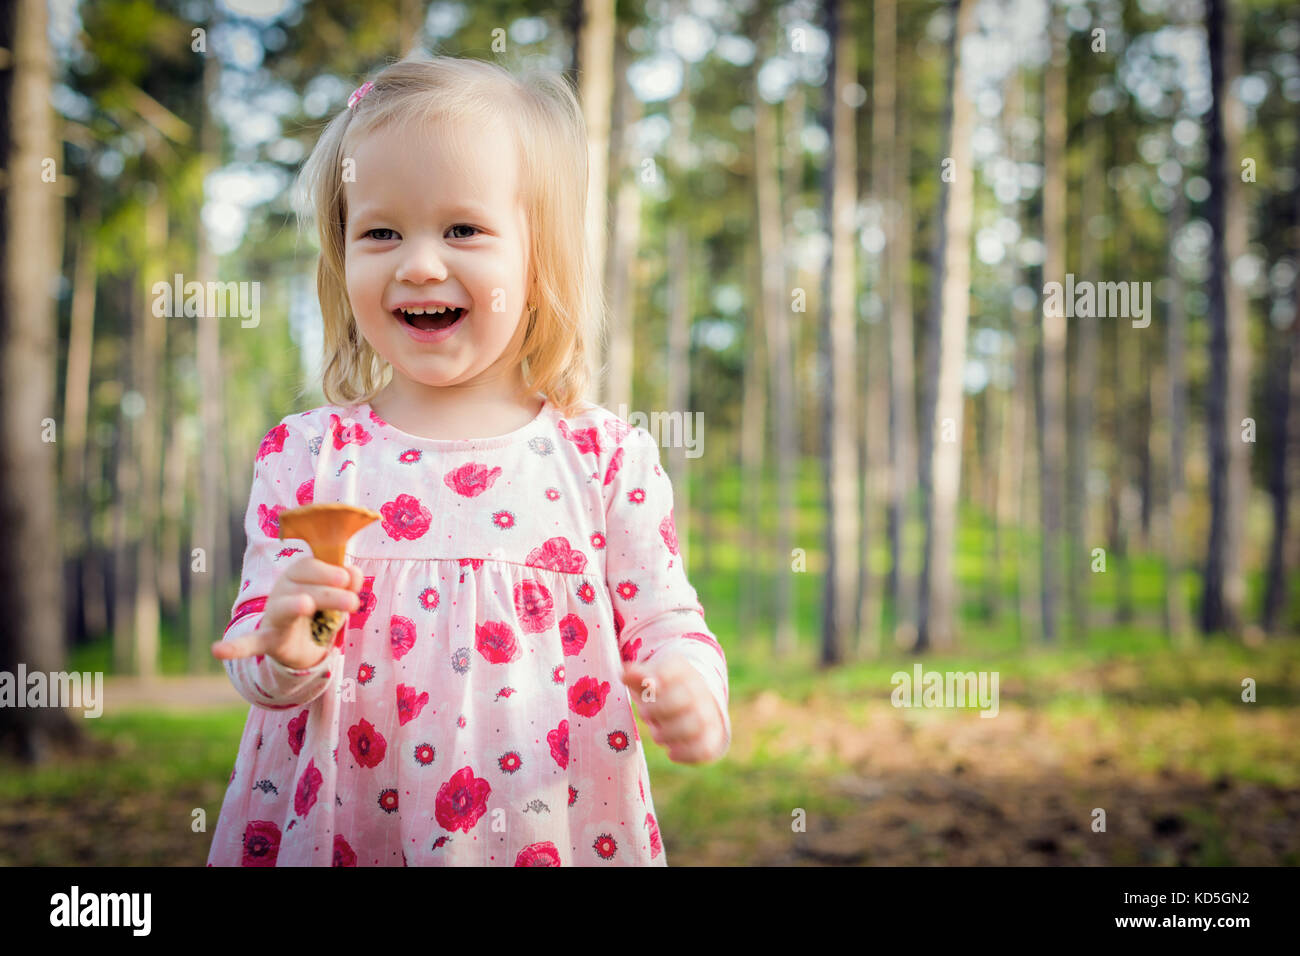 Cute blond toddler girl picking mushrooms in a forest. Happy child holding a mushroom and laughing Stock Photo